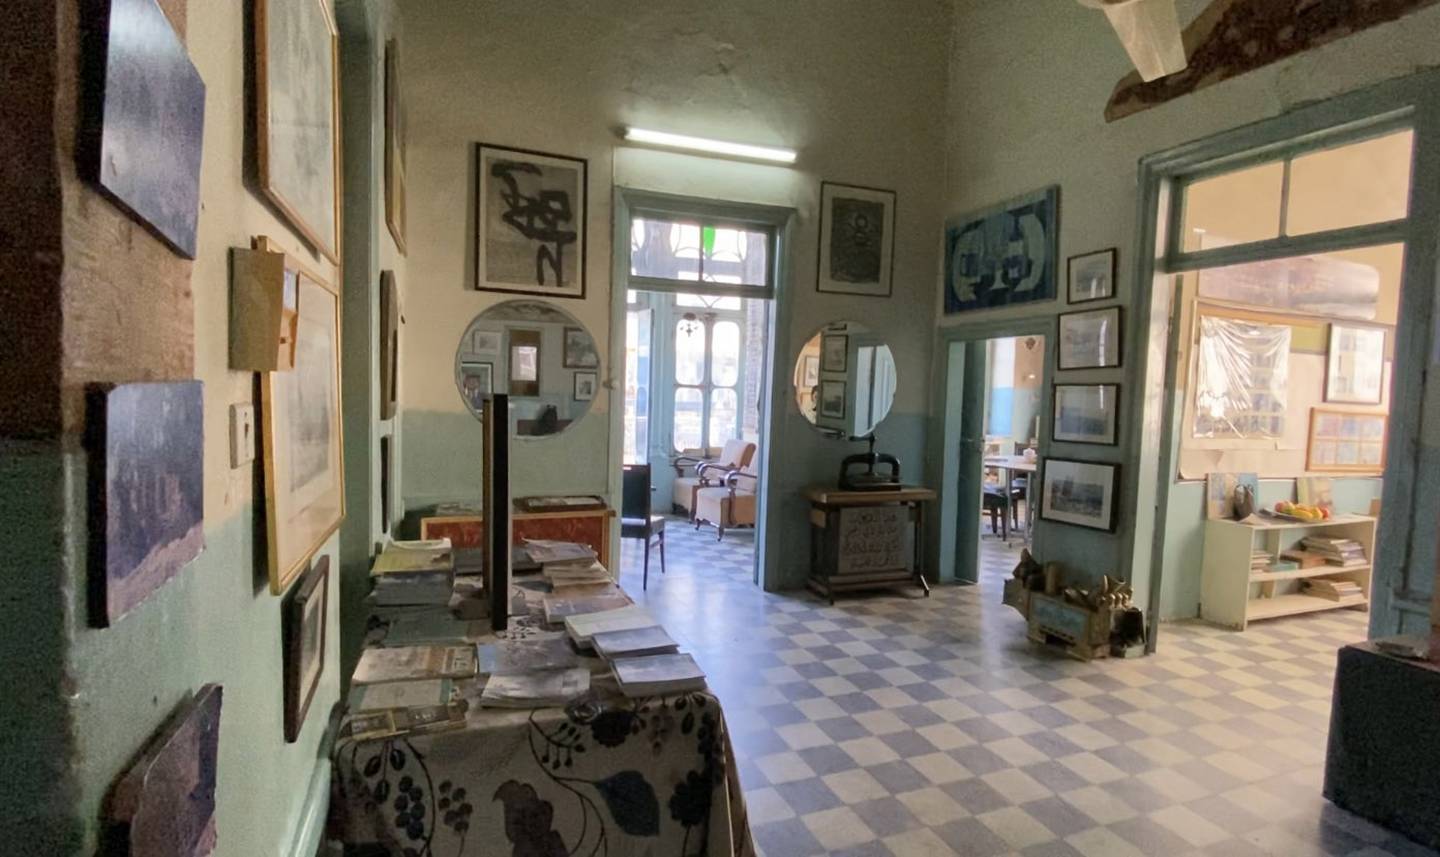 Inside the ‘Duke’s Diwan’, Amman’s first post office and now an Arts and Cultural museum preserved by Mamdouh Bisharat. Amy McConaghy / The National